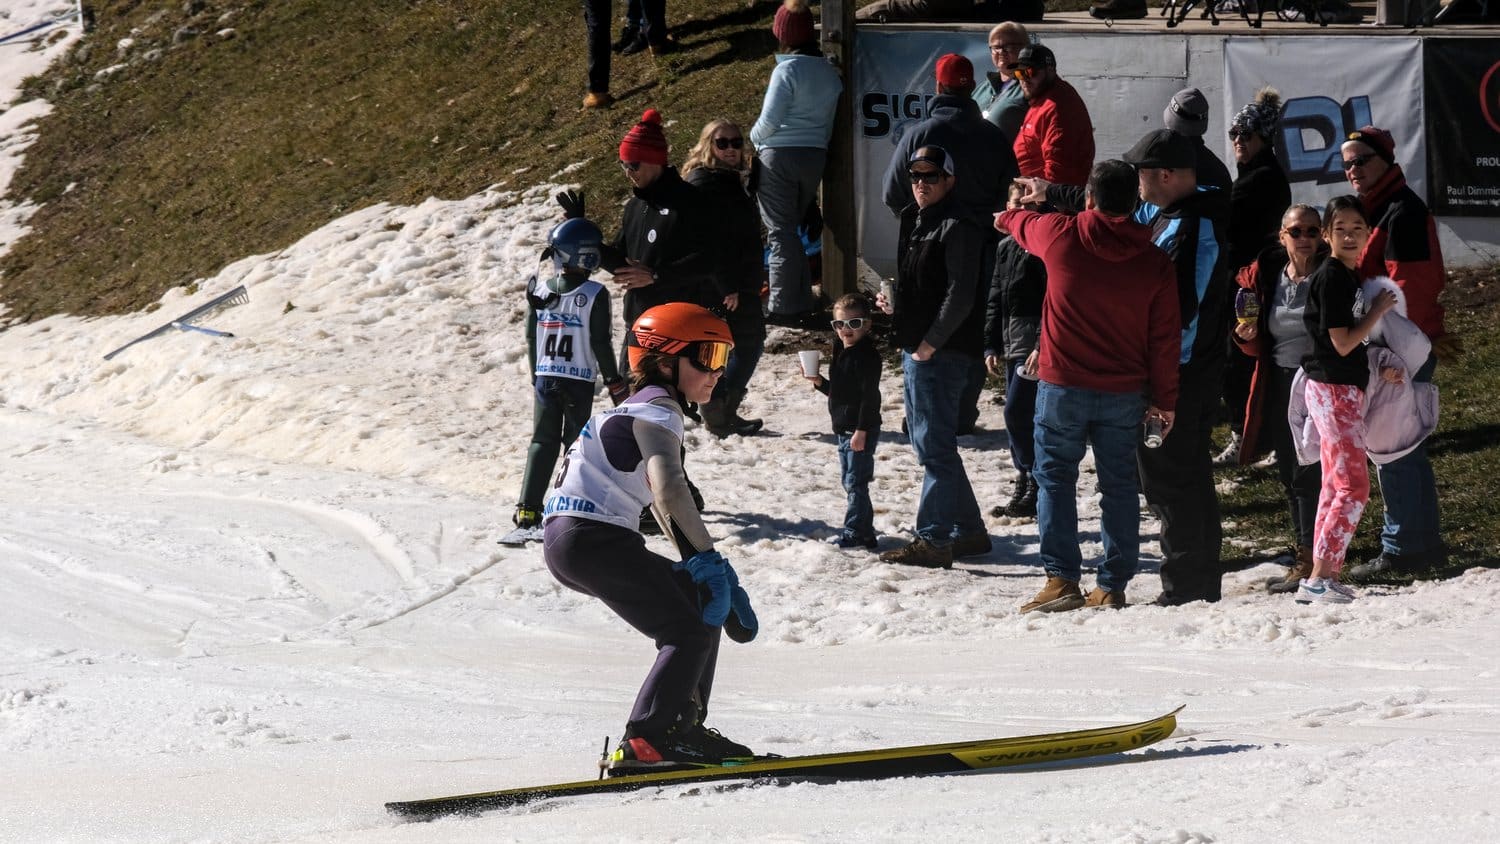 Parker York of Norge Ski Club at the 118th annual Norge Ski Club, winter tournament, 2023.